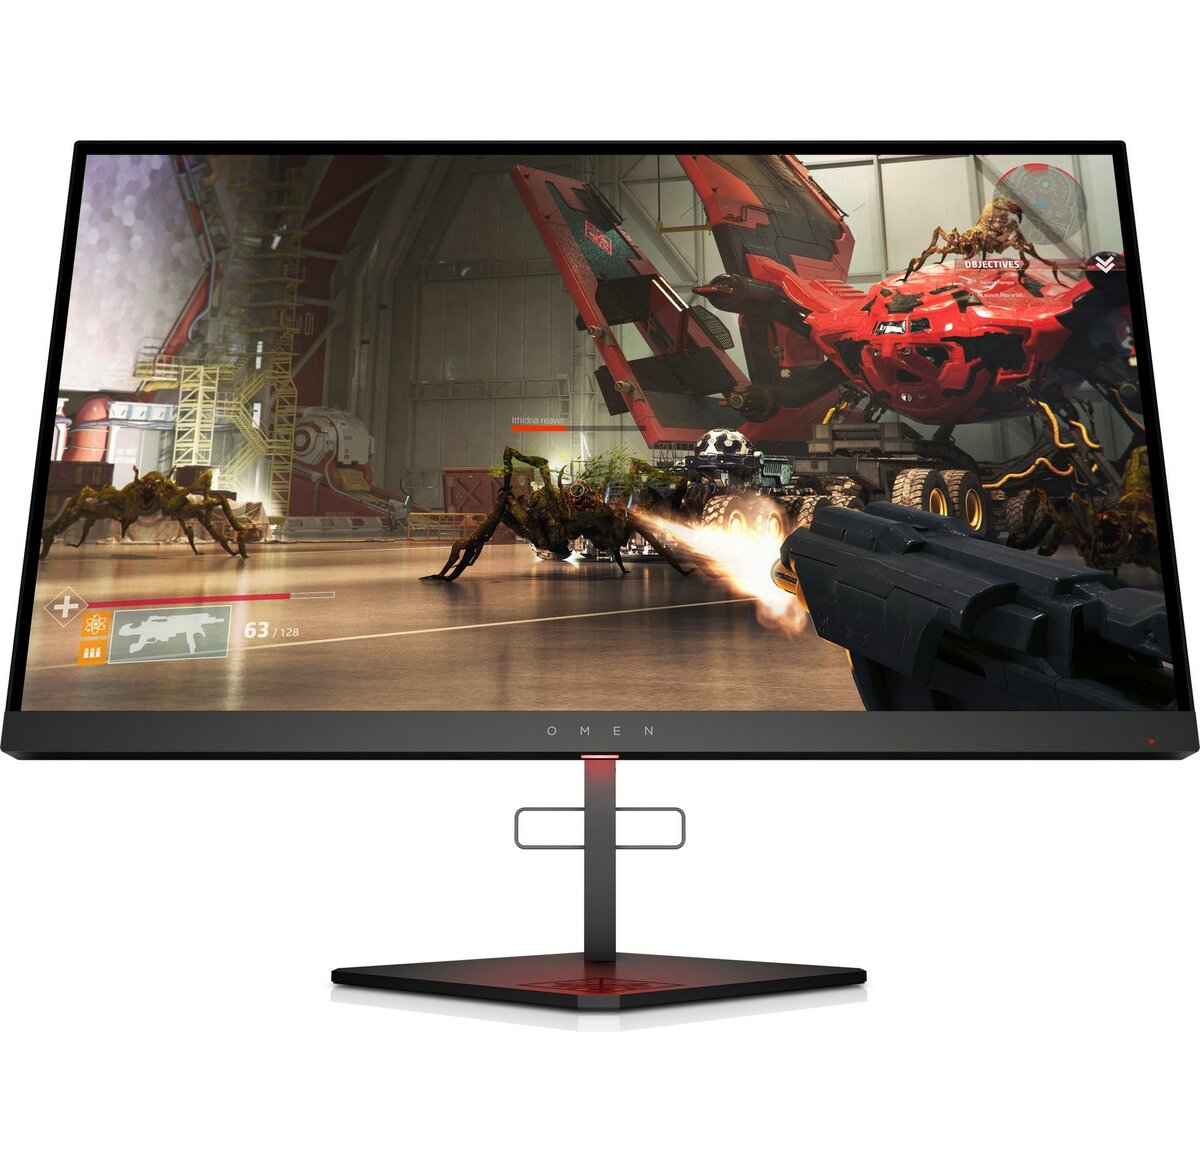 HP, OMEN, X, 25f, 24.5, Inch, 240Hz, Gaming, Display, with, Adaptive, Sync, 